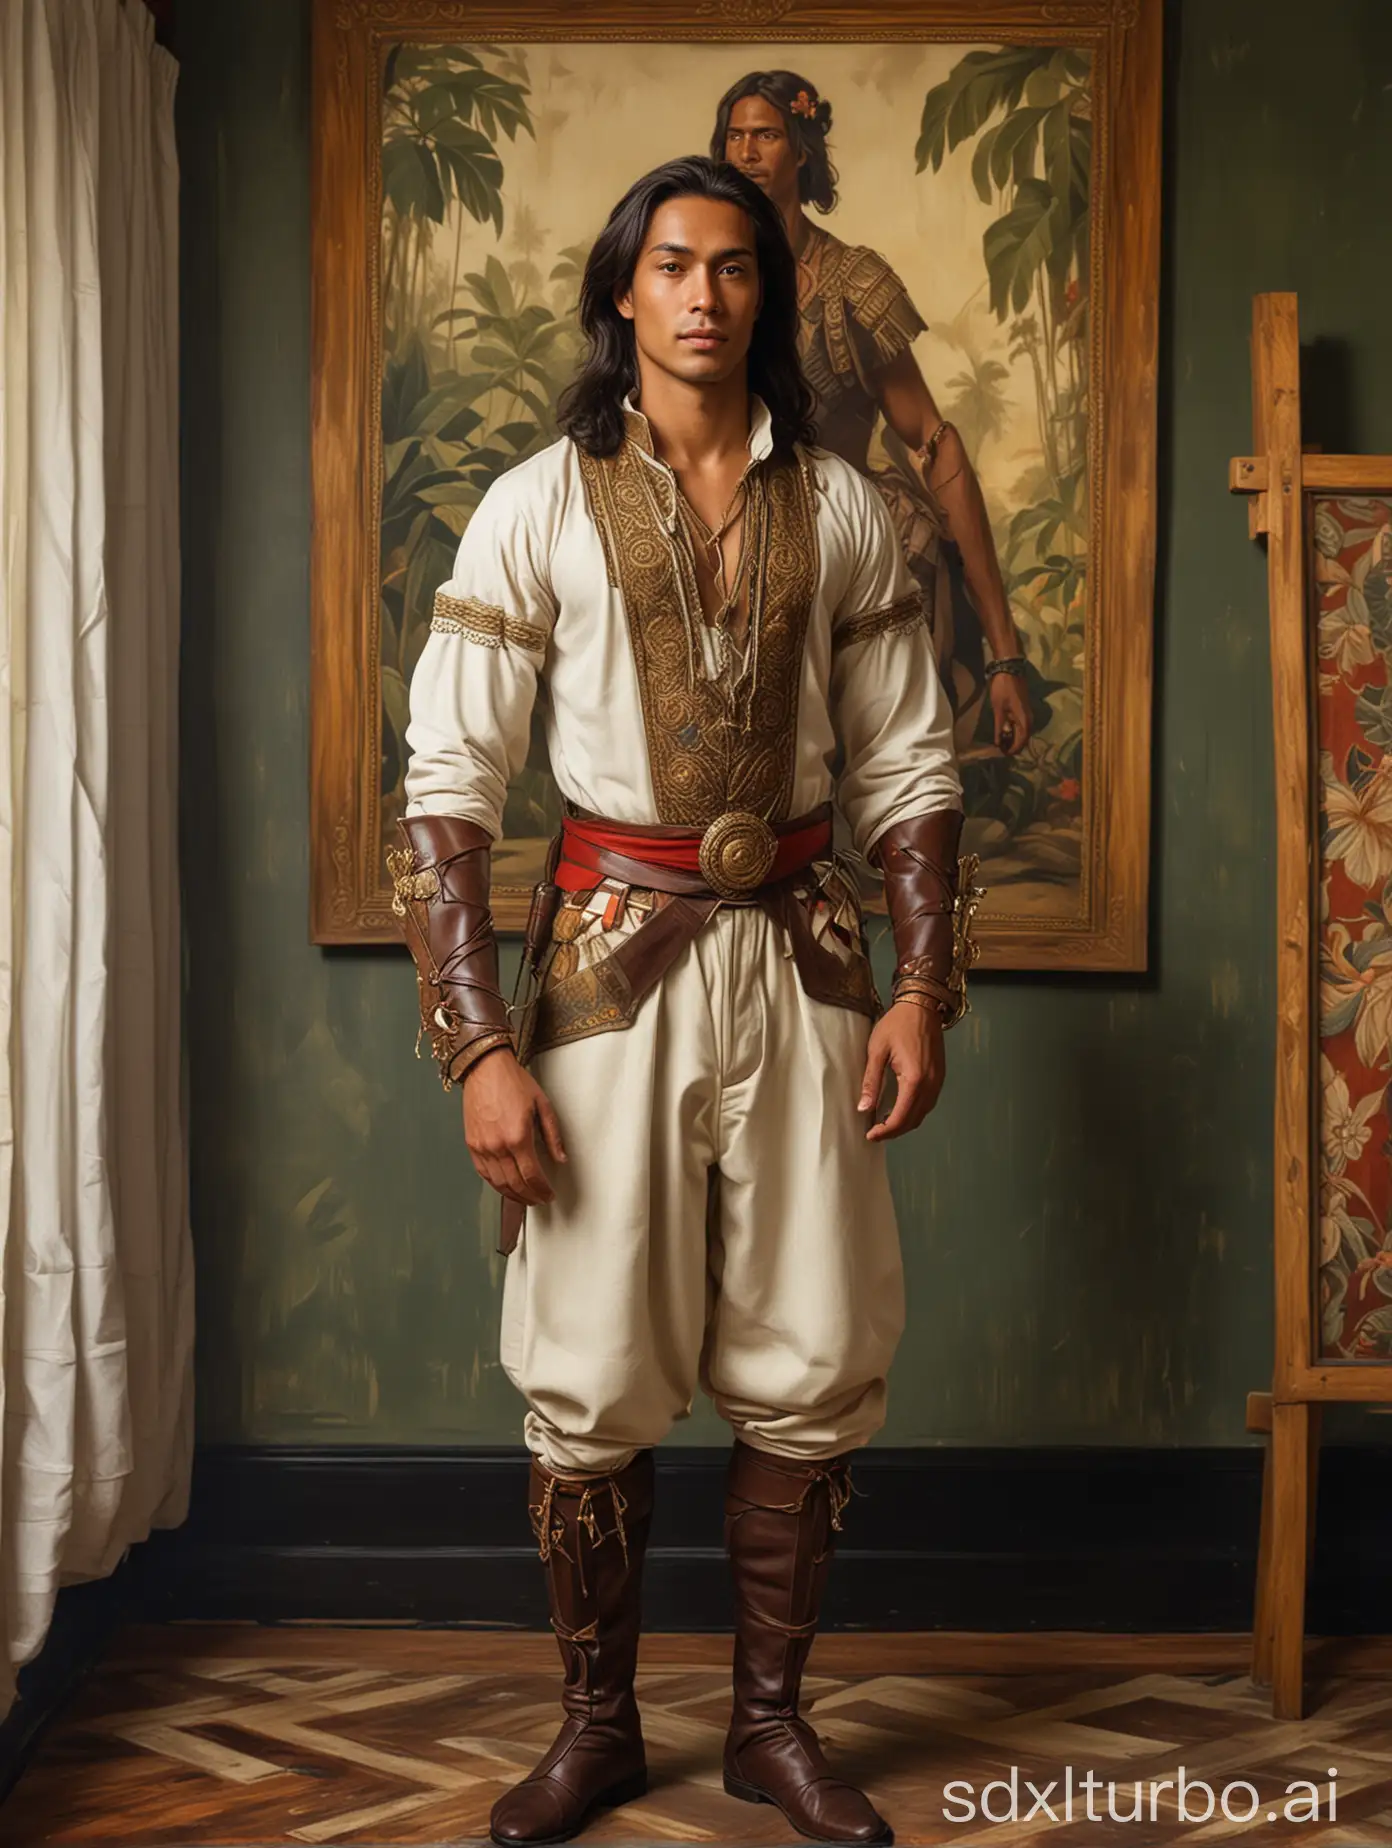 A full-body shot of a handsome, tall, and muscular Manado-Java descent guy with shoulder-length hair in an explorer-traditional costume, with a background of an anthropologist room in the style of painting by Leyendecker.